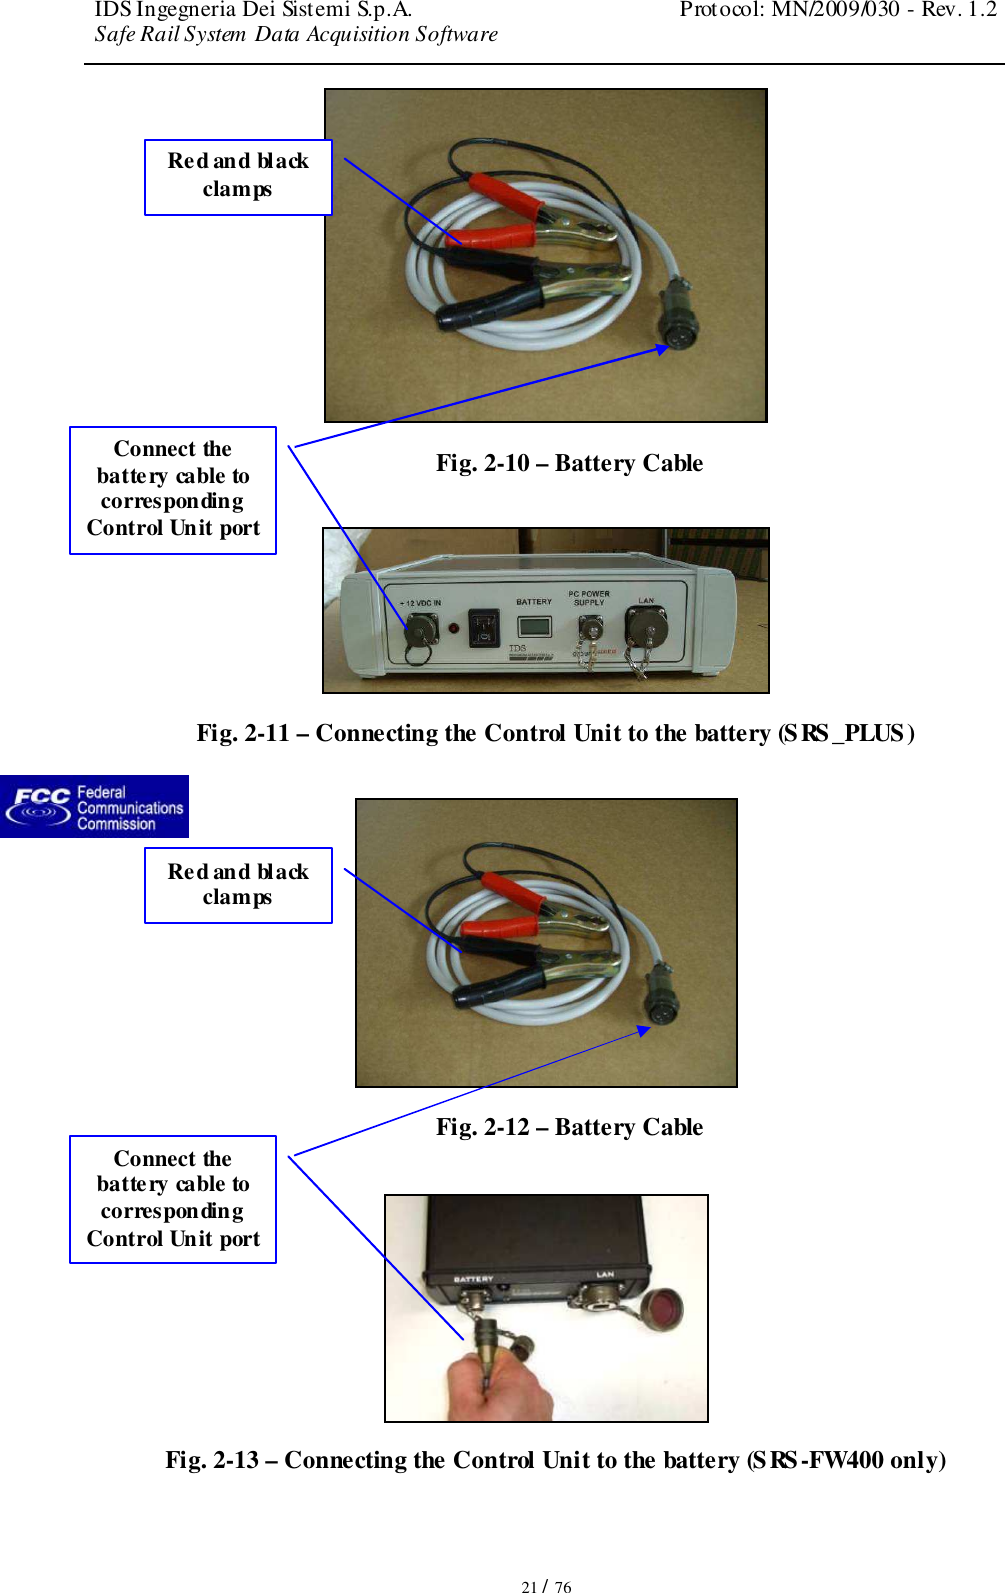 IDS Ingegneria Dei Sistemi S.p.A.  Protocol: MN/2009/030 - Rev. 1.2 Safe Rail System Data Acquisition Software   21 / 76  Fig. 2-10 – Battery Cable   Fig. 2-11 – Connecting the Control Unit to the battery (SRS_PLUS)   Fig. 2-12 – Battery Cable   Fig. 2-13 – Connecting the Control Unit to the battery (SRS-FW400 only) Connect the battery cable to corresponding Control Unit port  Red and black clamps Connect the battery cable to corresponding Control Unit port  Red and black clamps 